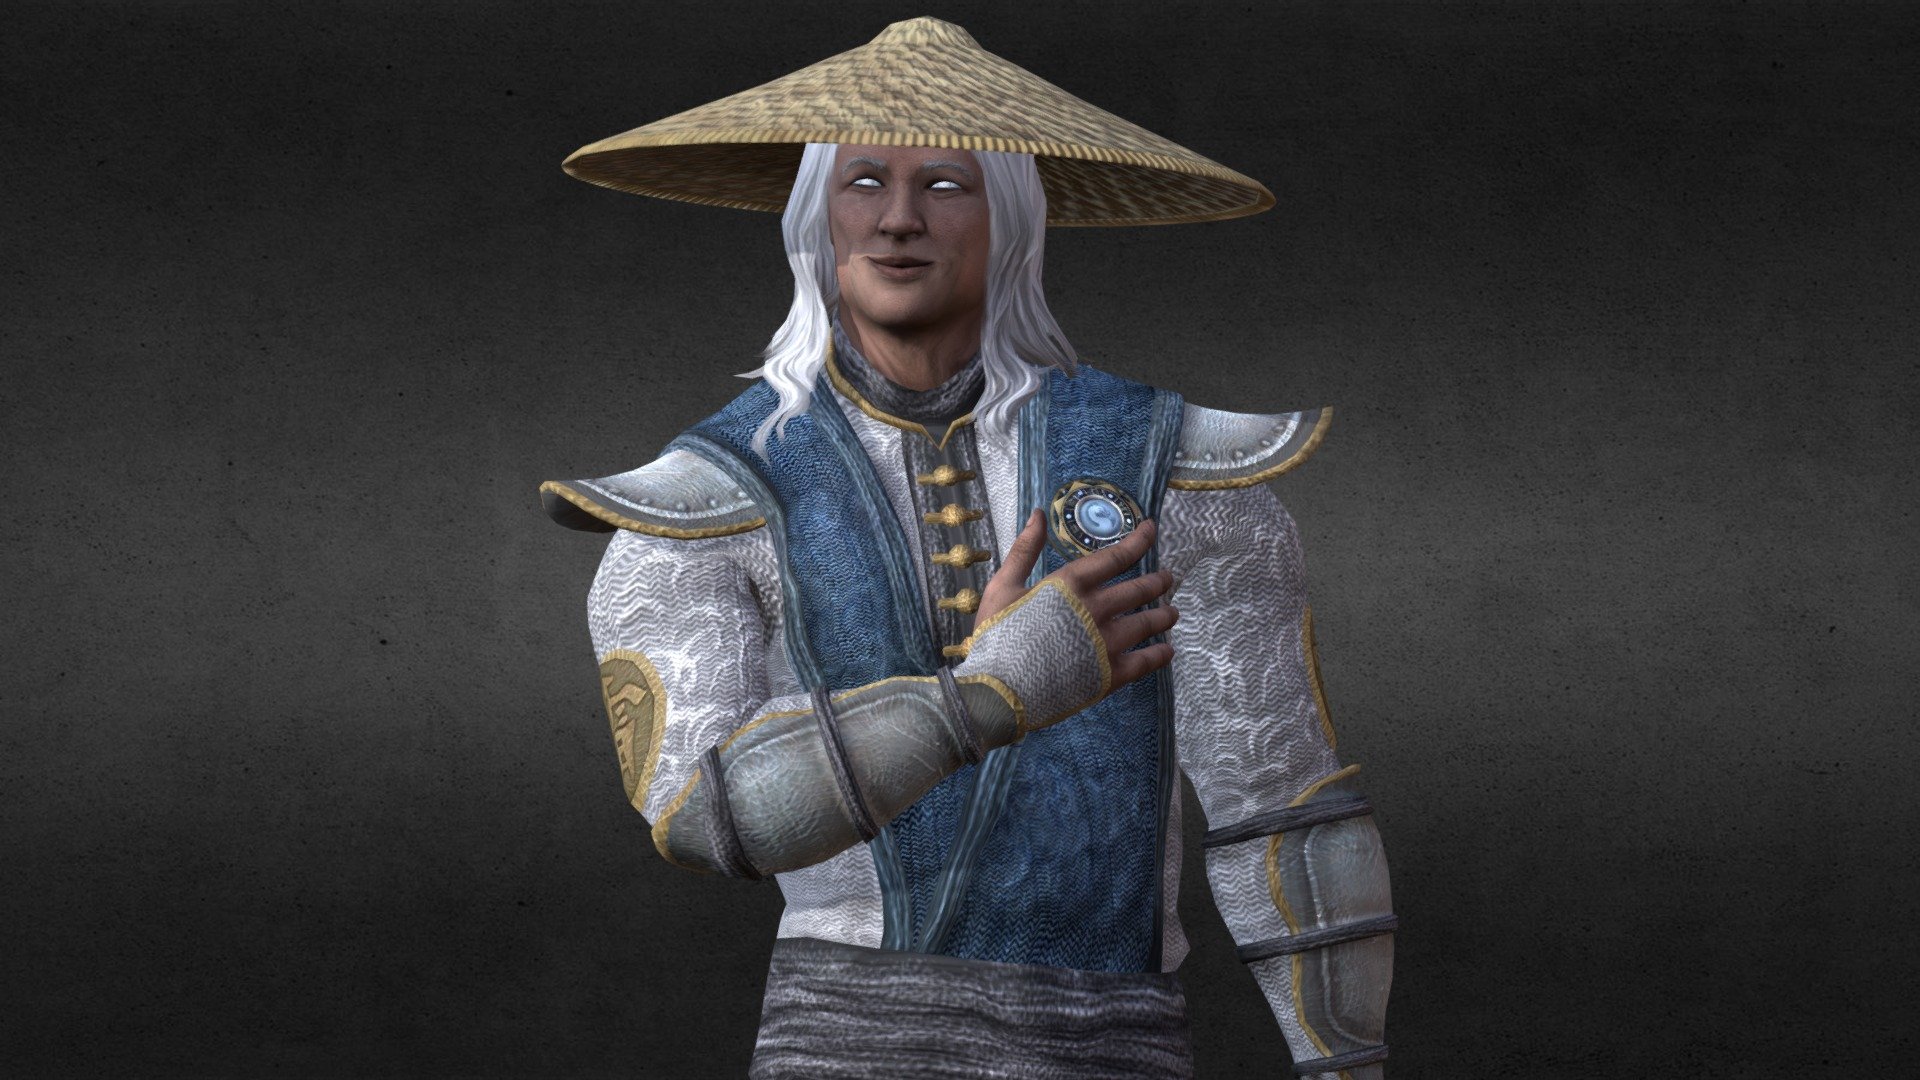 Raiden is a particularly unique and compelling character, and I wanted to give him a MK9 redesign that would really stand out while staying true to his MKX look. I might have worked with the MKX model itself, if not for the fact that the cowl on MK9 could be removed - so I did, and added hair according to his concept art. His outfit is much fancier now, suitable for godly attire.
Technical details:
-Face repainted and resculpted to look like MKX. Skin tone adjusted, stubble removed. Cowl removed by paint-work, hair rigged onto his head. Hands also repainted for detail/texture and to match his face.
-All outfit elements upgraded with surface details. Grey cloud pattern applied to white cloth areas, fabric texture added throughout. Cloth dynamics painted onto entire outfit. All metal areas now have an embossed surface.
-Model re-scaled to MKX proportions and height, armature adjusted to A-pose. Hat and amulet upgraded to HD textures as well, both removable 3d model